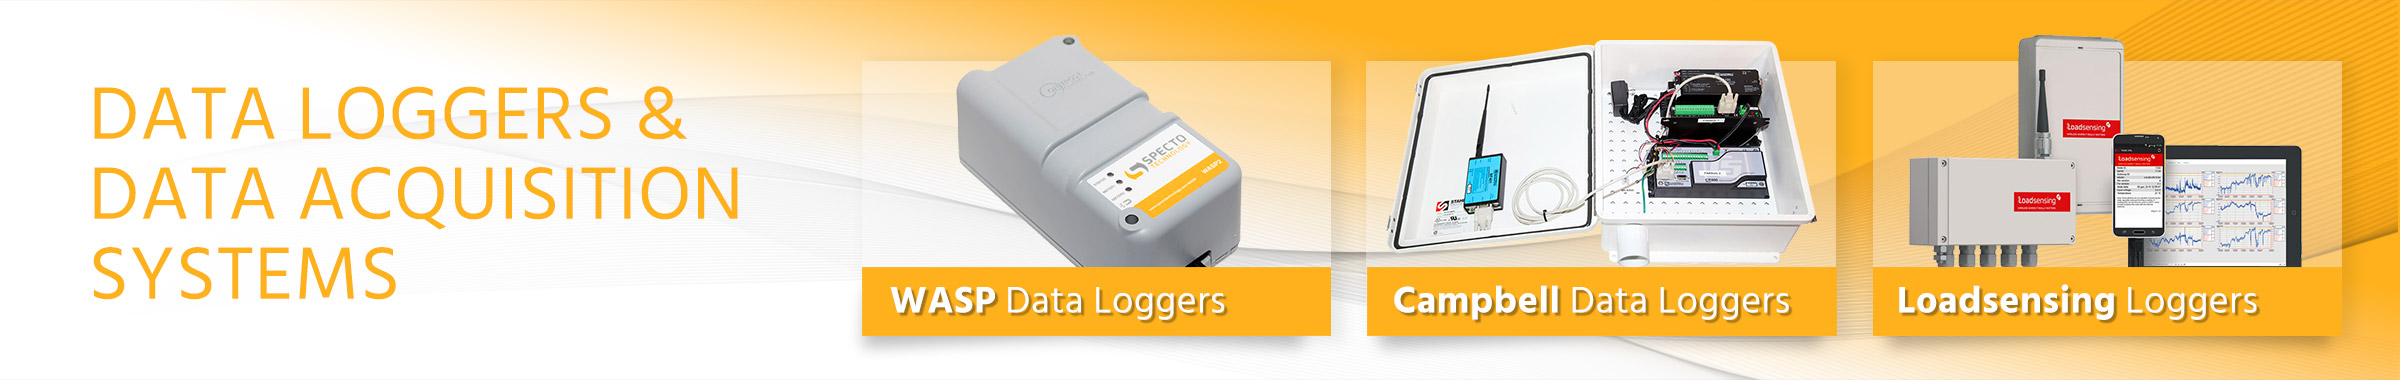 Data Loggers & Data Acquisition Systems - WASP, Campbell, Loadsensing